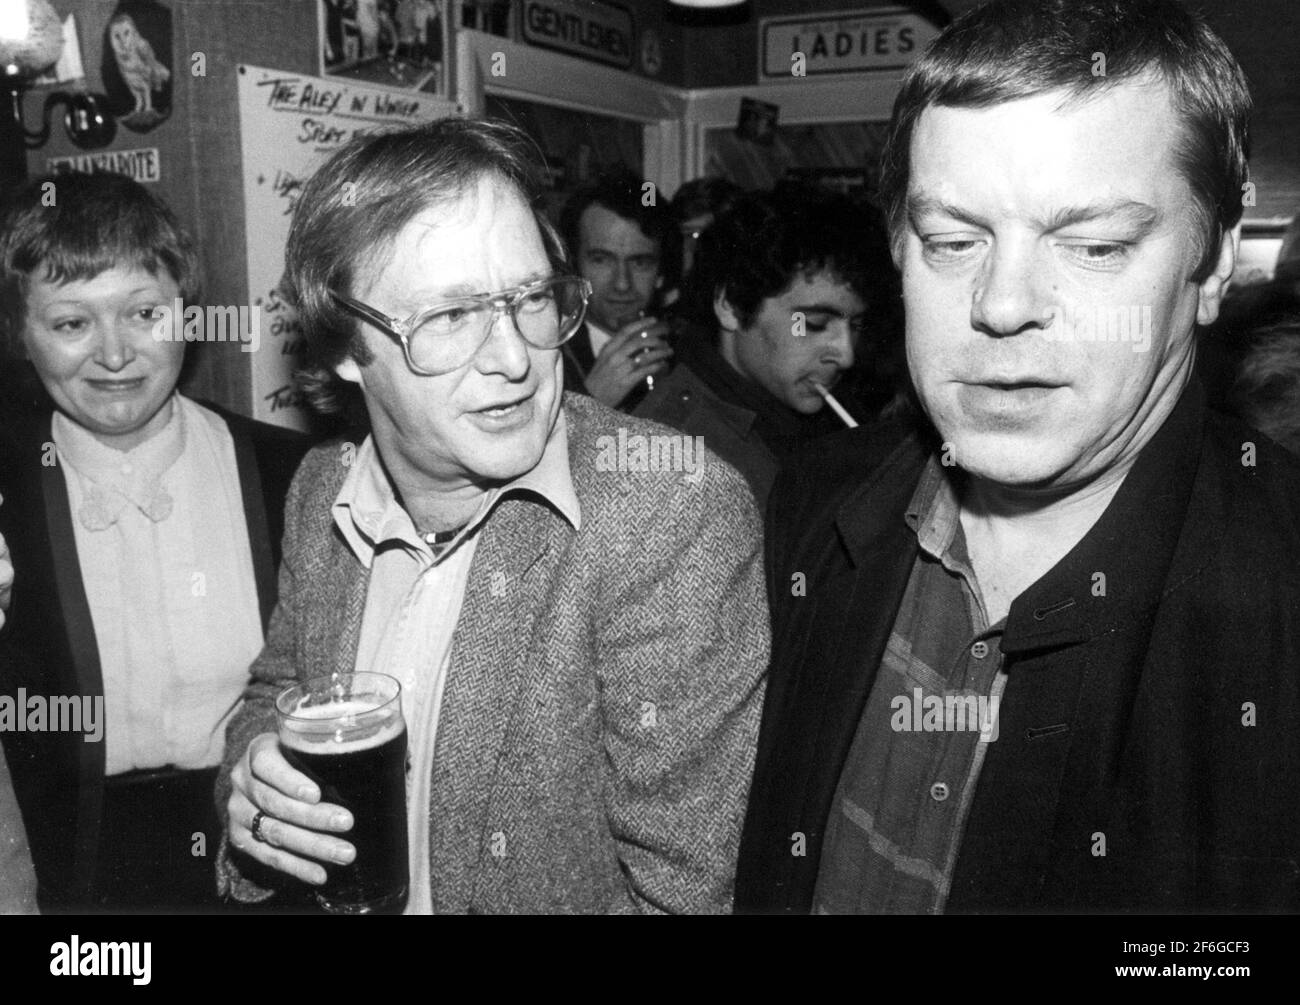 ACTOR DENNIS WATERMAN ENJOYS A PINT WITH PALS AT THE ALEXANDRA PUB, CHICHESTER, PIC MIKE WALKER 1984 Stock Photo